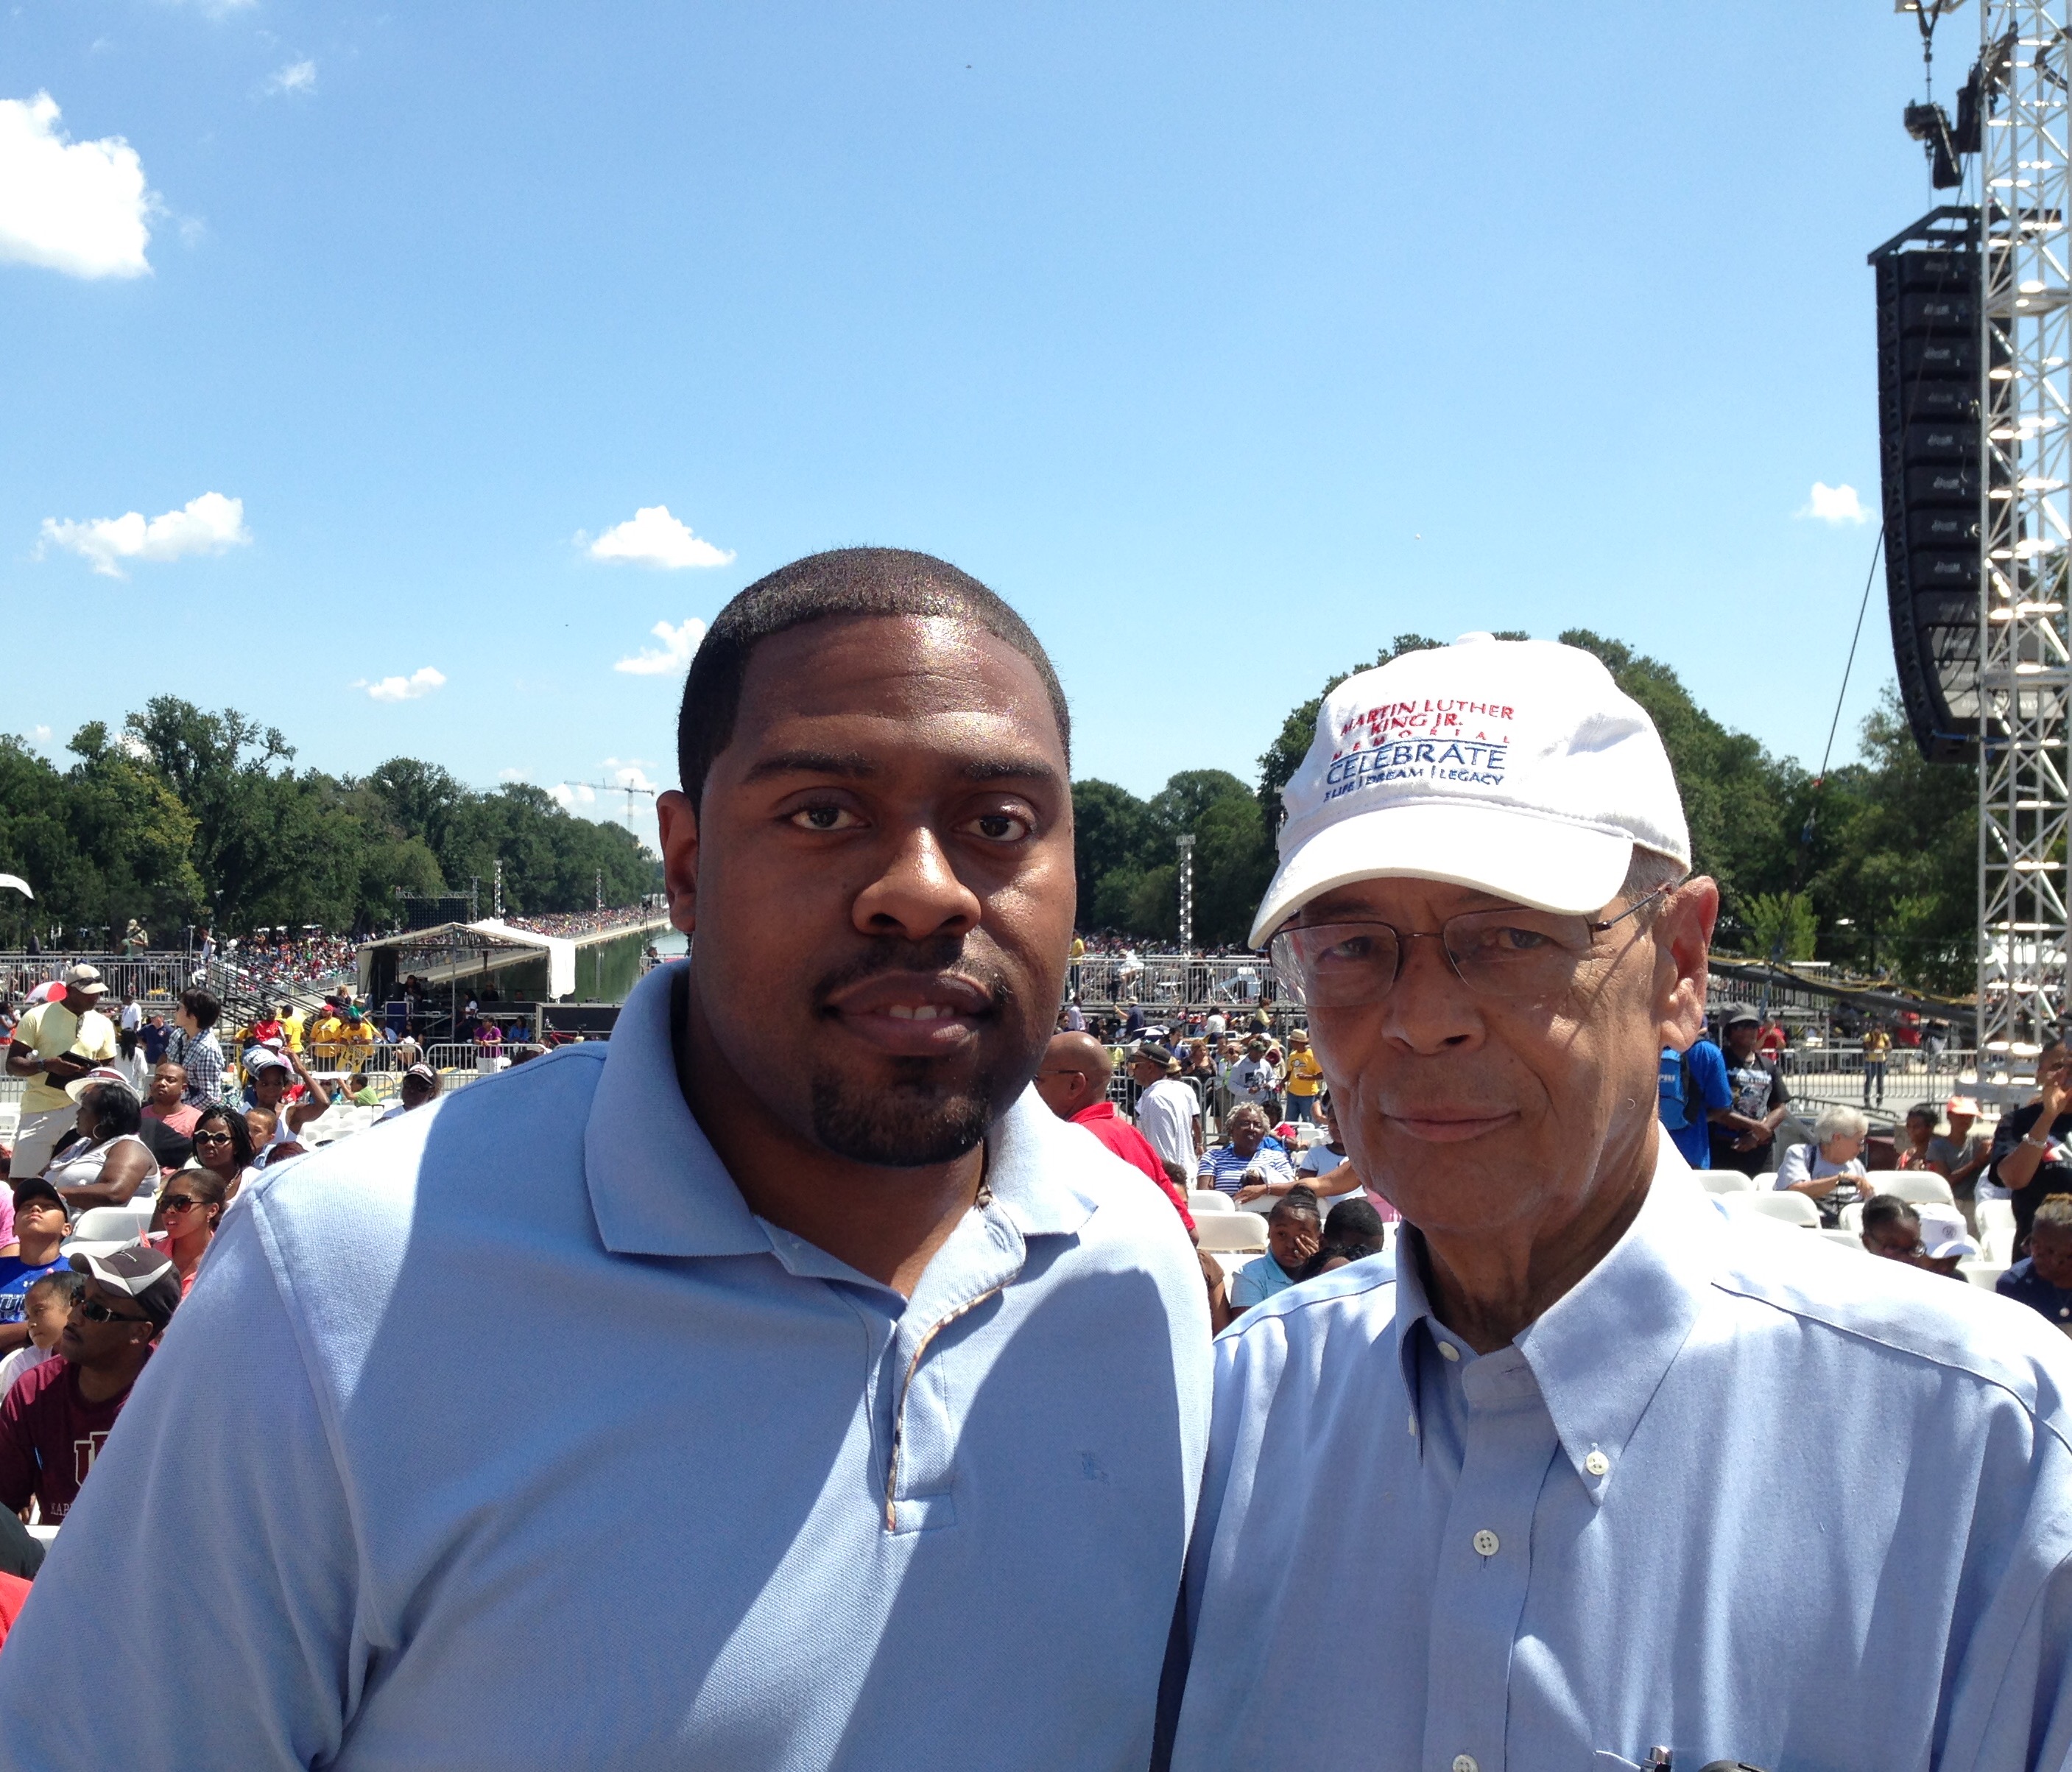 Julian Bond (right) during the 50th anniversary celebration of the March on Washington